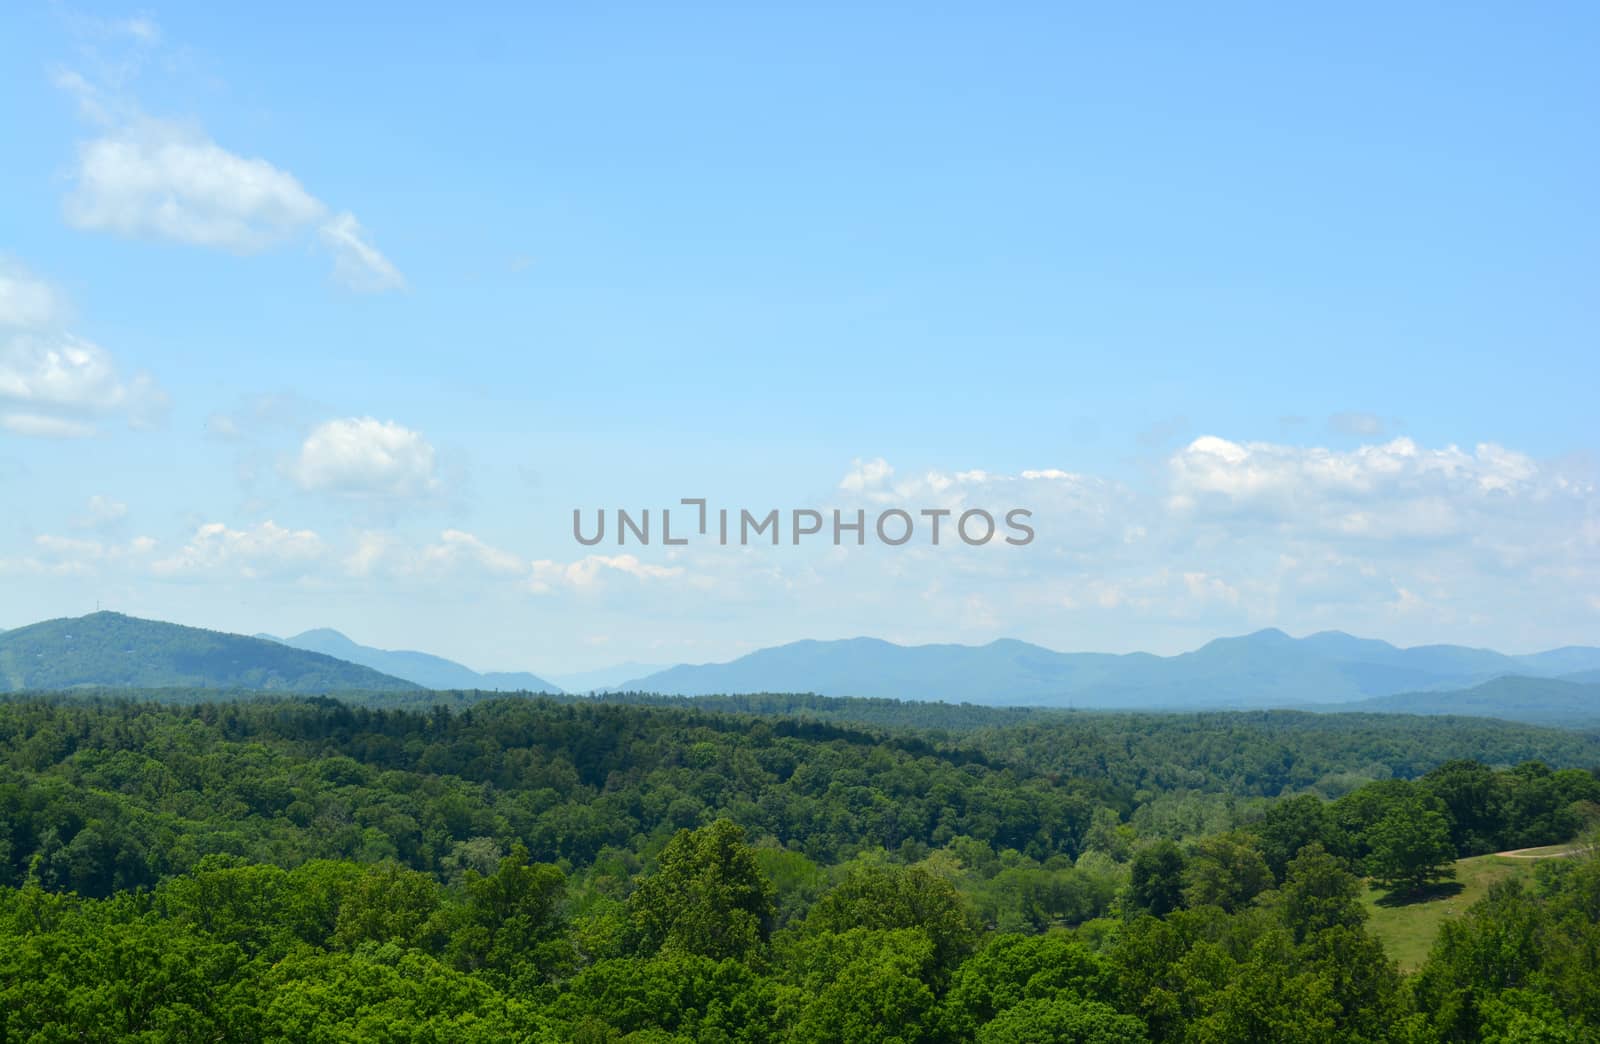 Asheville North Carolina - In The Mountains